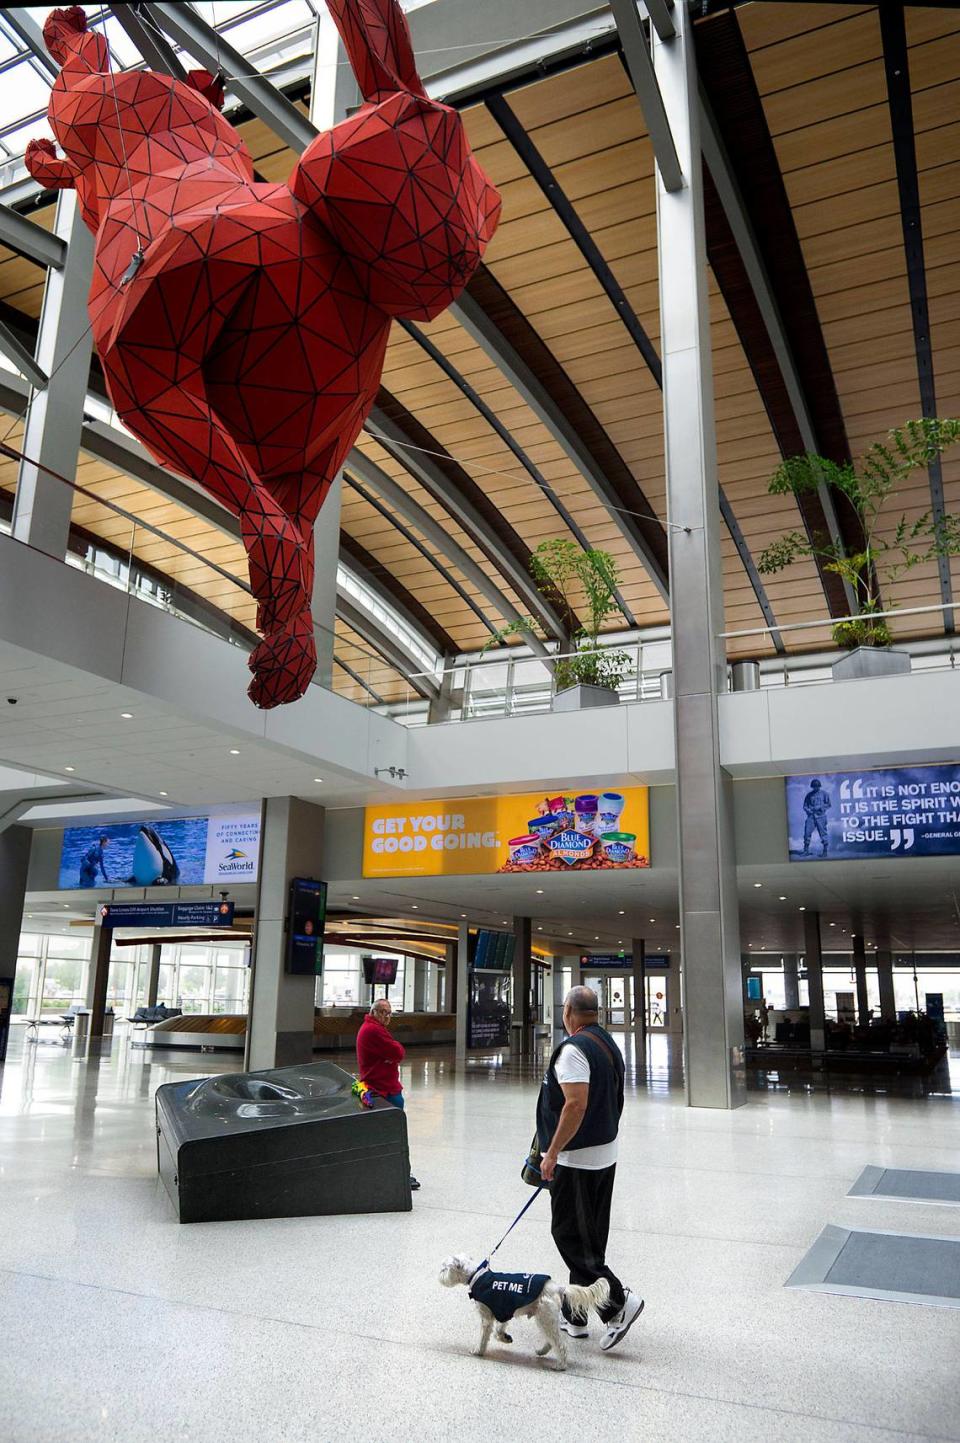 Handler Ralph Jacks walks with therapy dog Gosha beneath “Leap” by Lawrence Argent at Sacramento International Airport in Sacramento on Sept. 16, 2015. The sculpture consists of two parts: a giant red rabbit made of aluminum and an oversized granite suitcase.